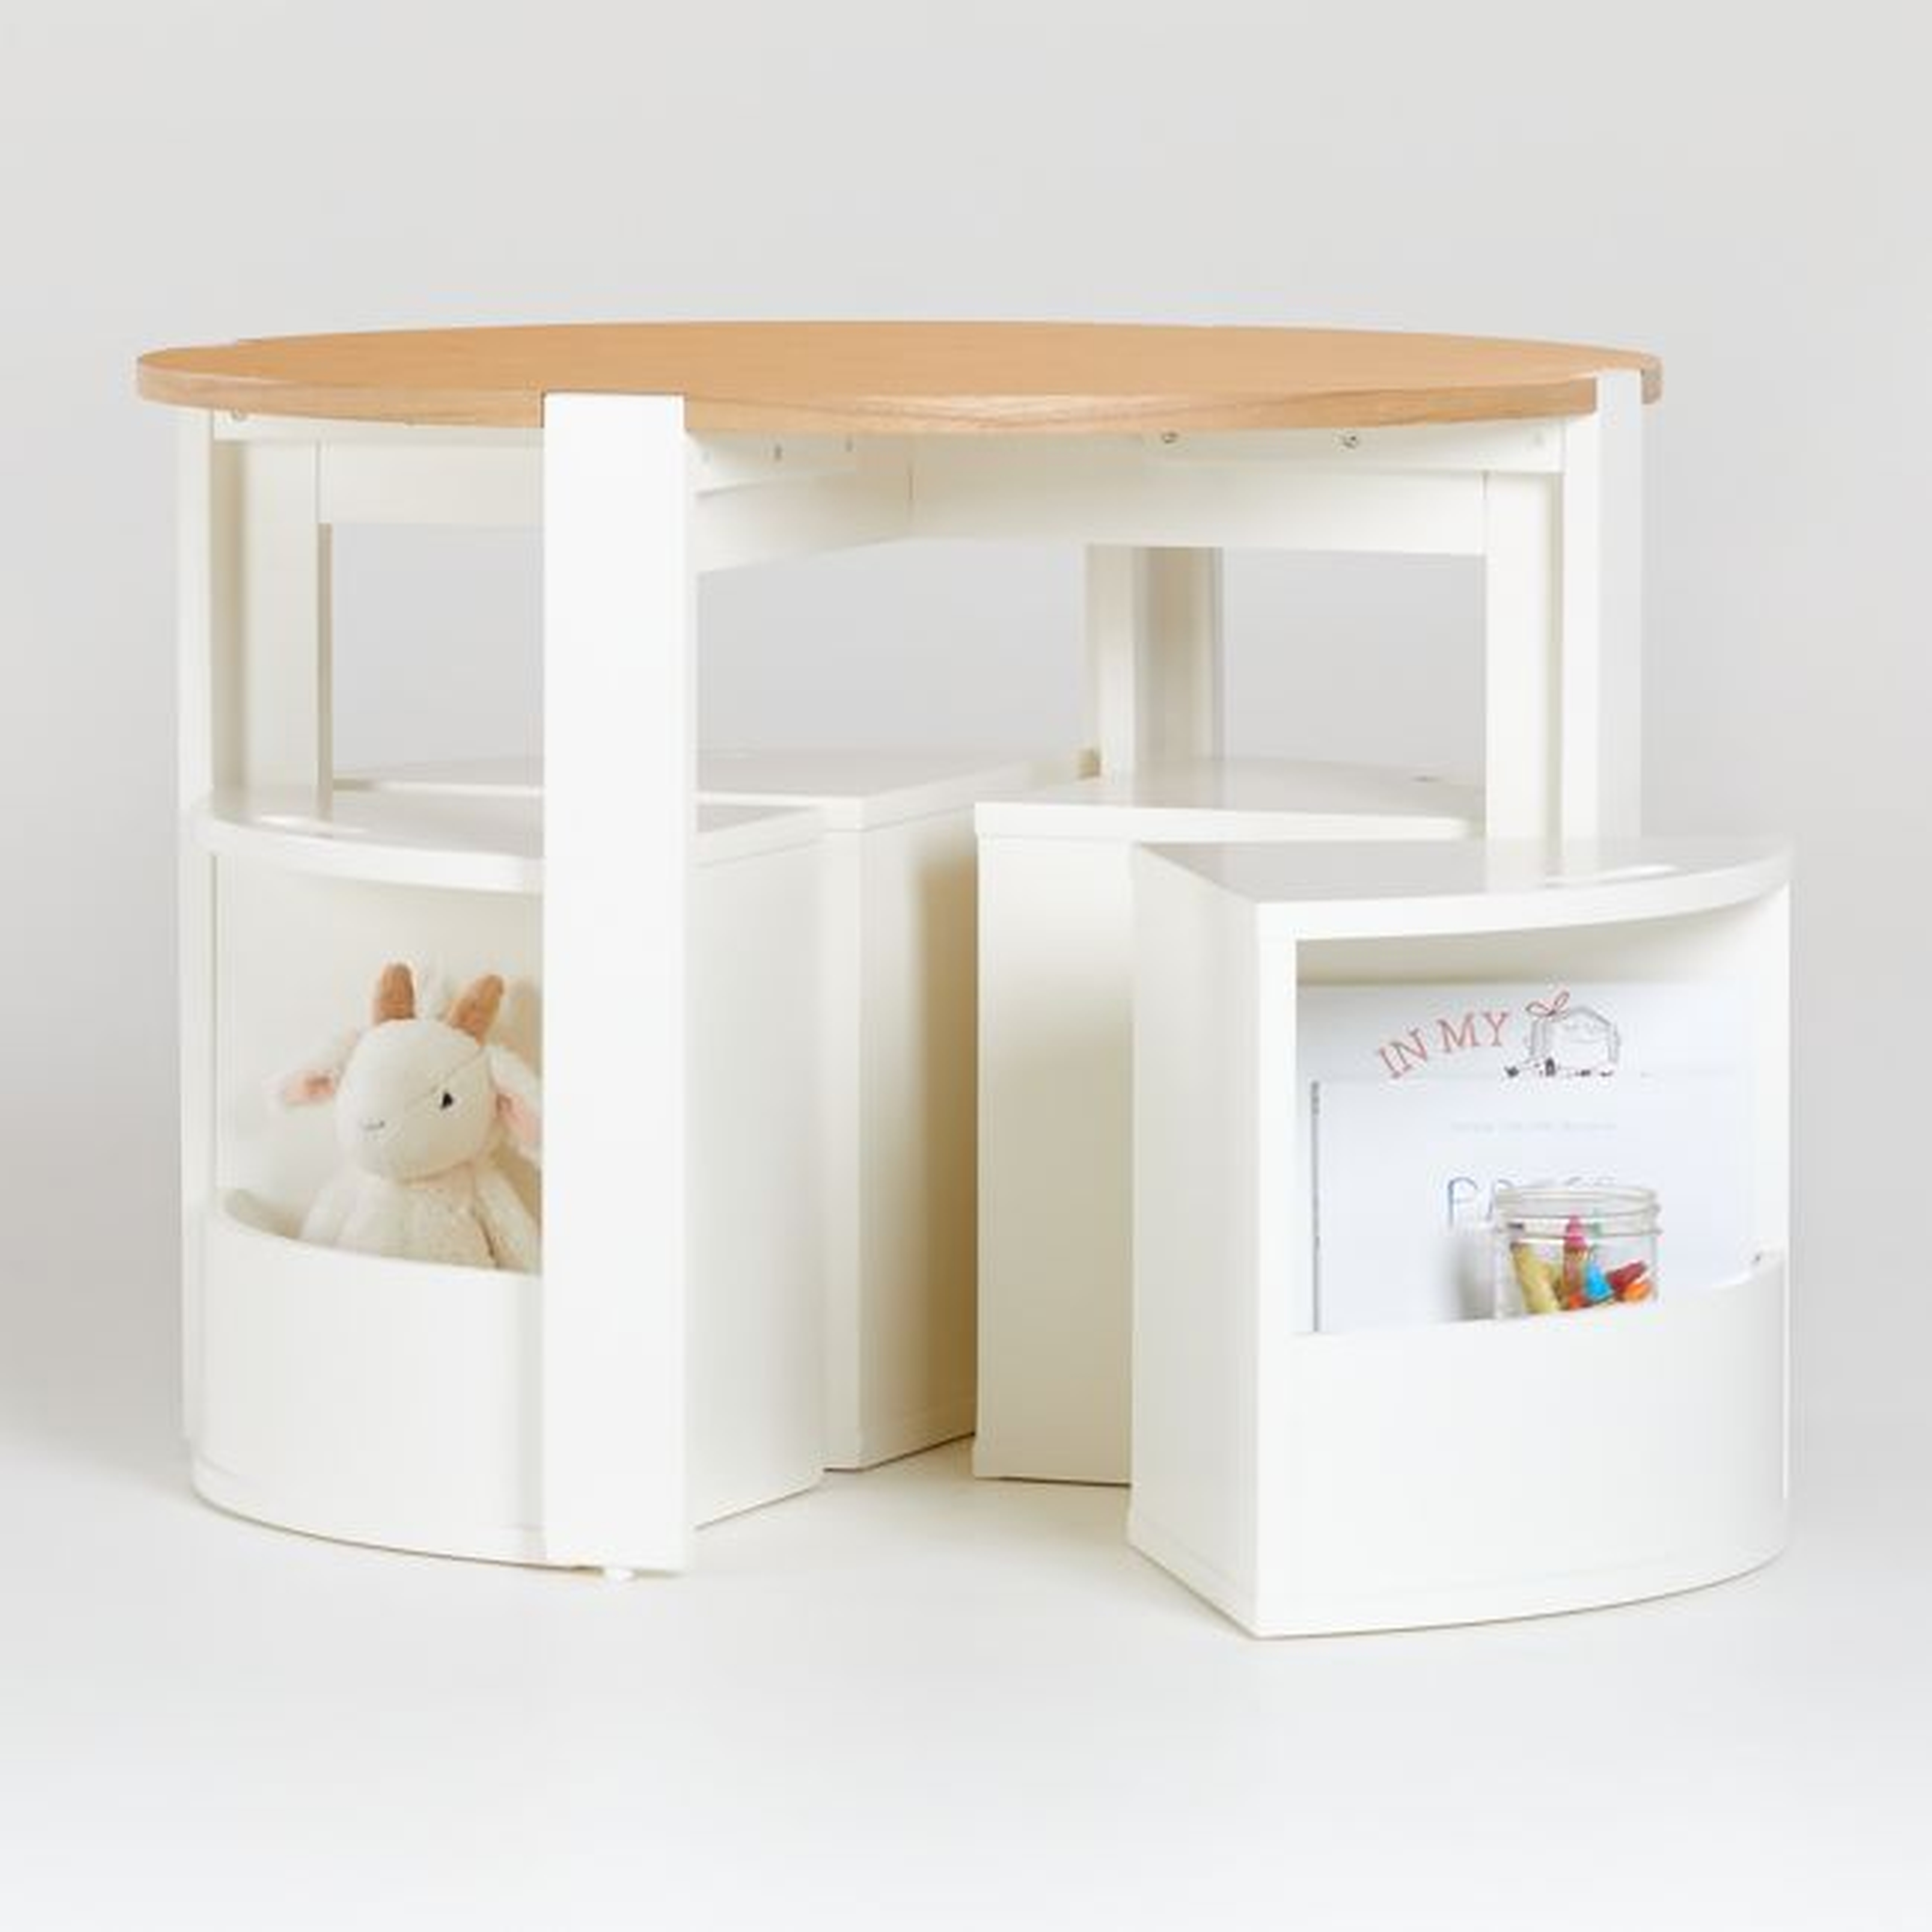 Nesting White and Natural Play Table, Chairs, and Acrylic Mat Set - Crate and Barrel